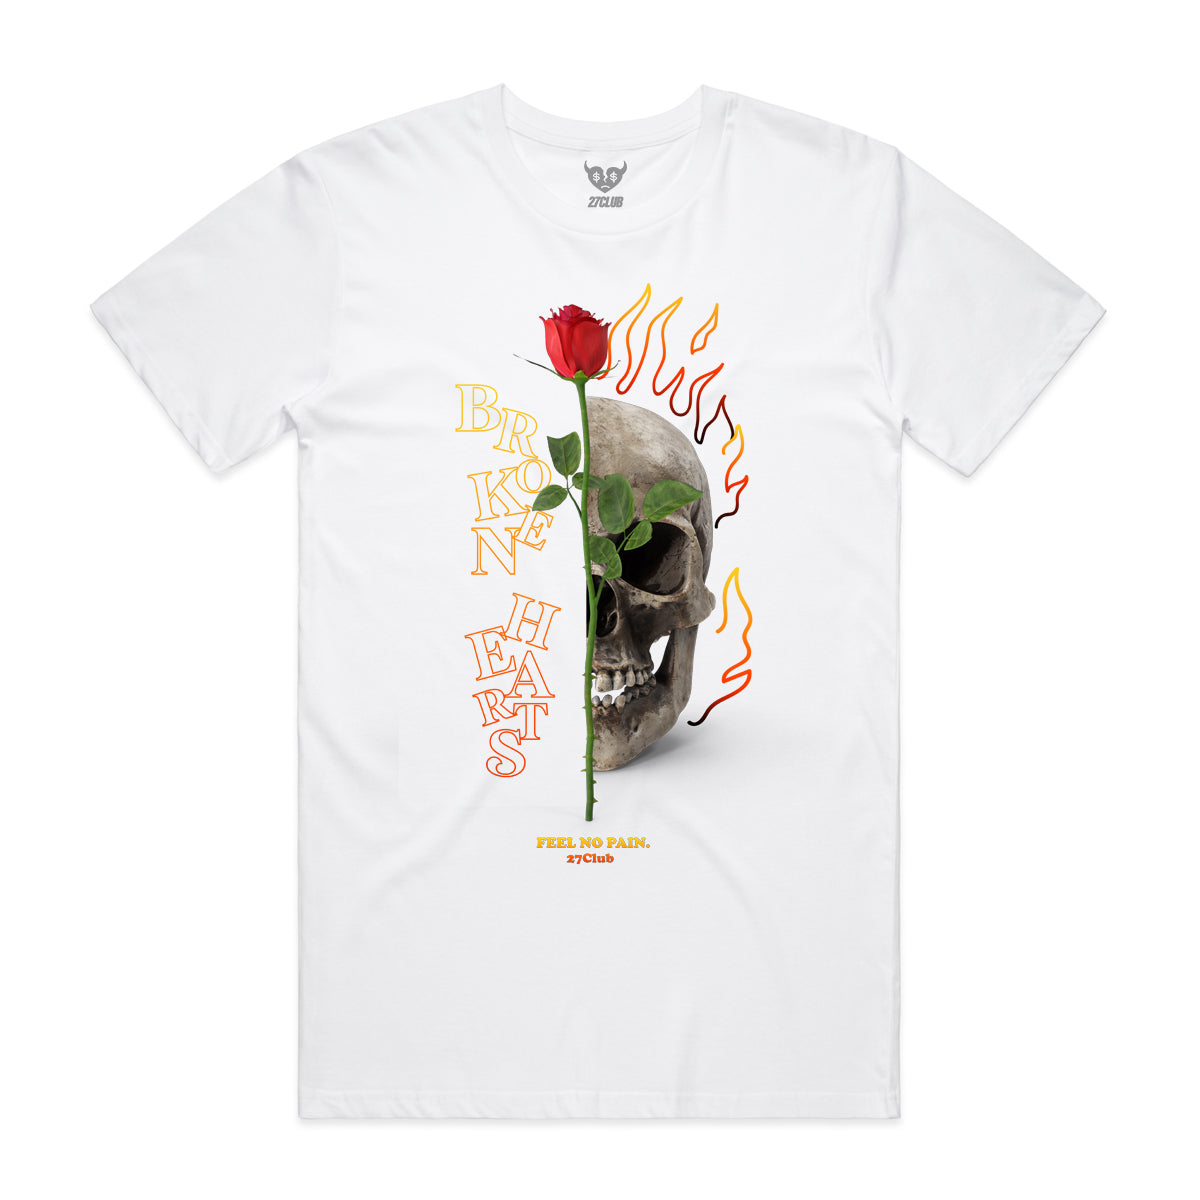 Burning For You - Tee